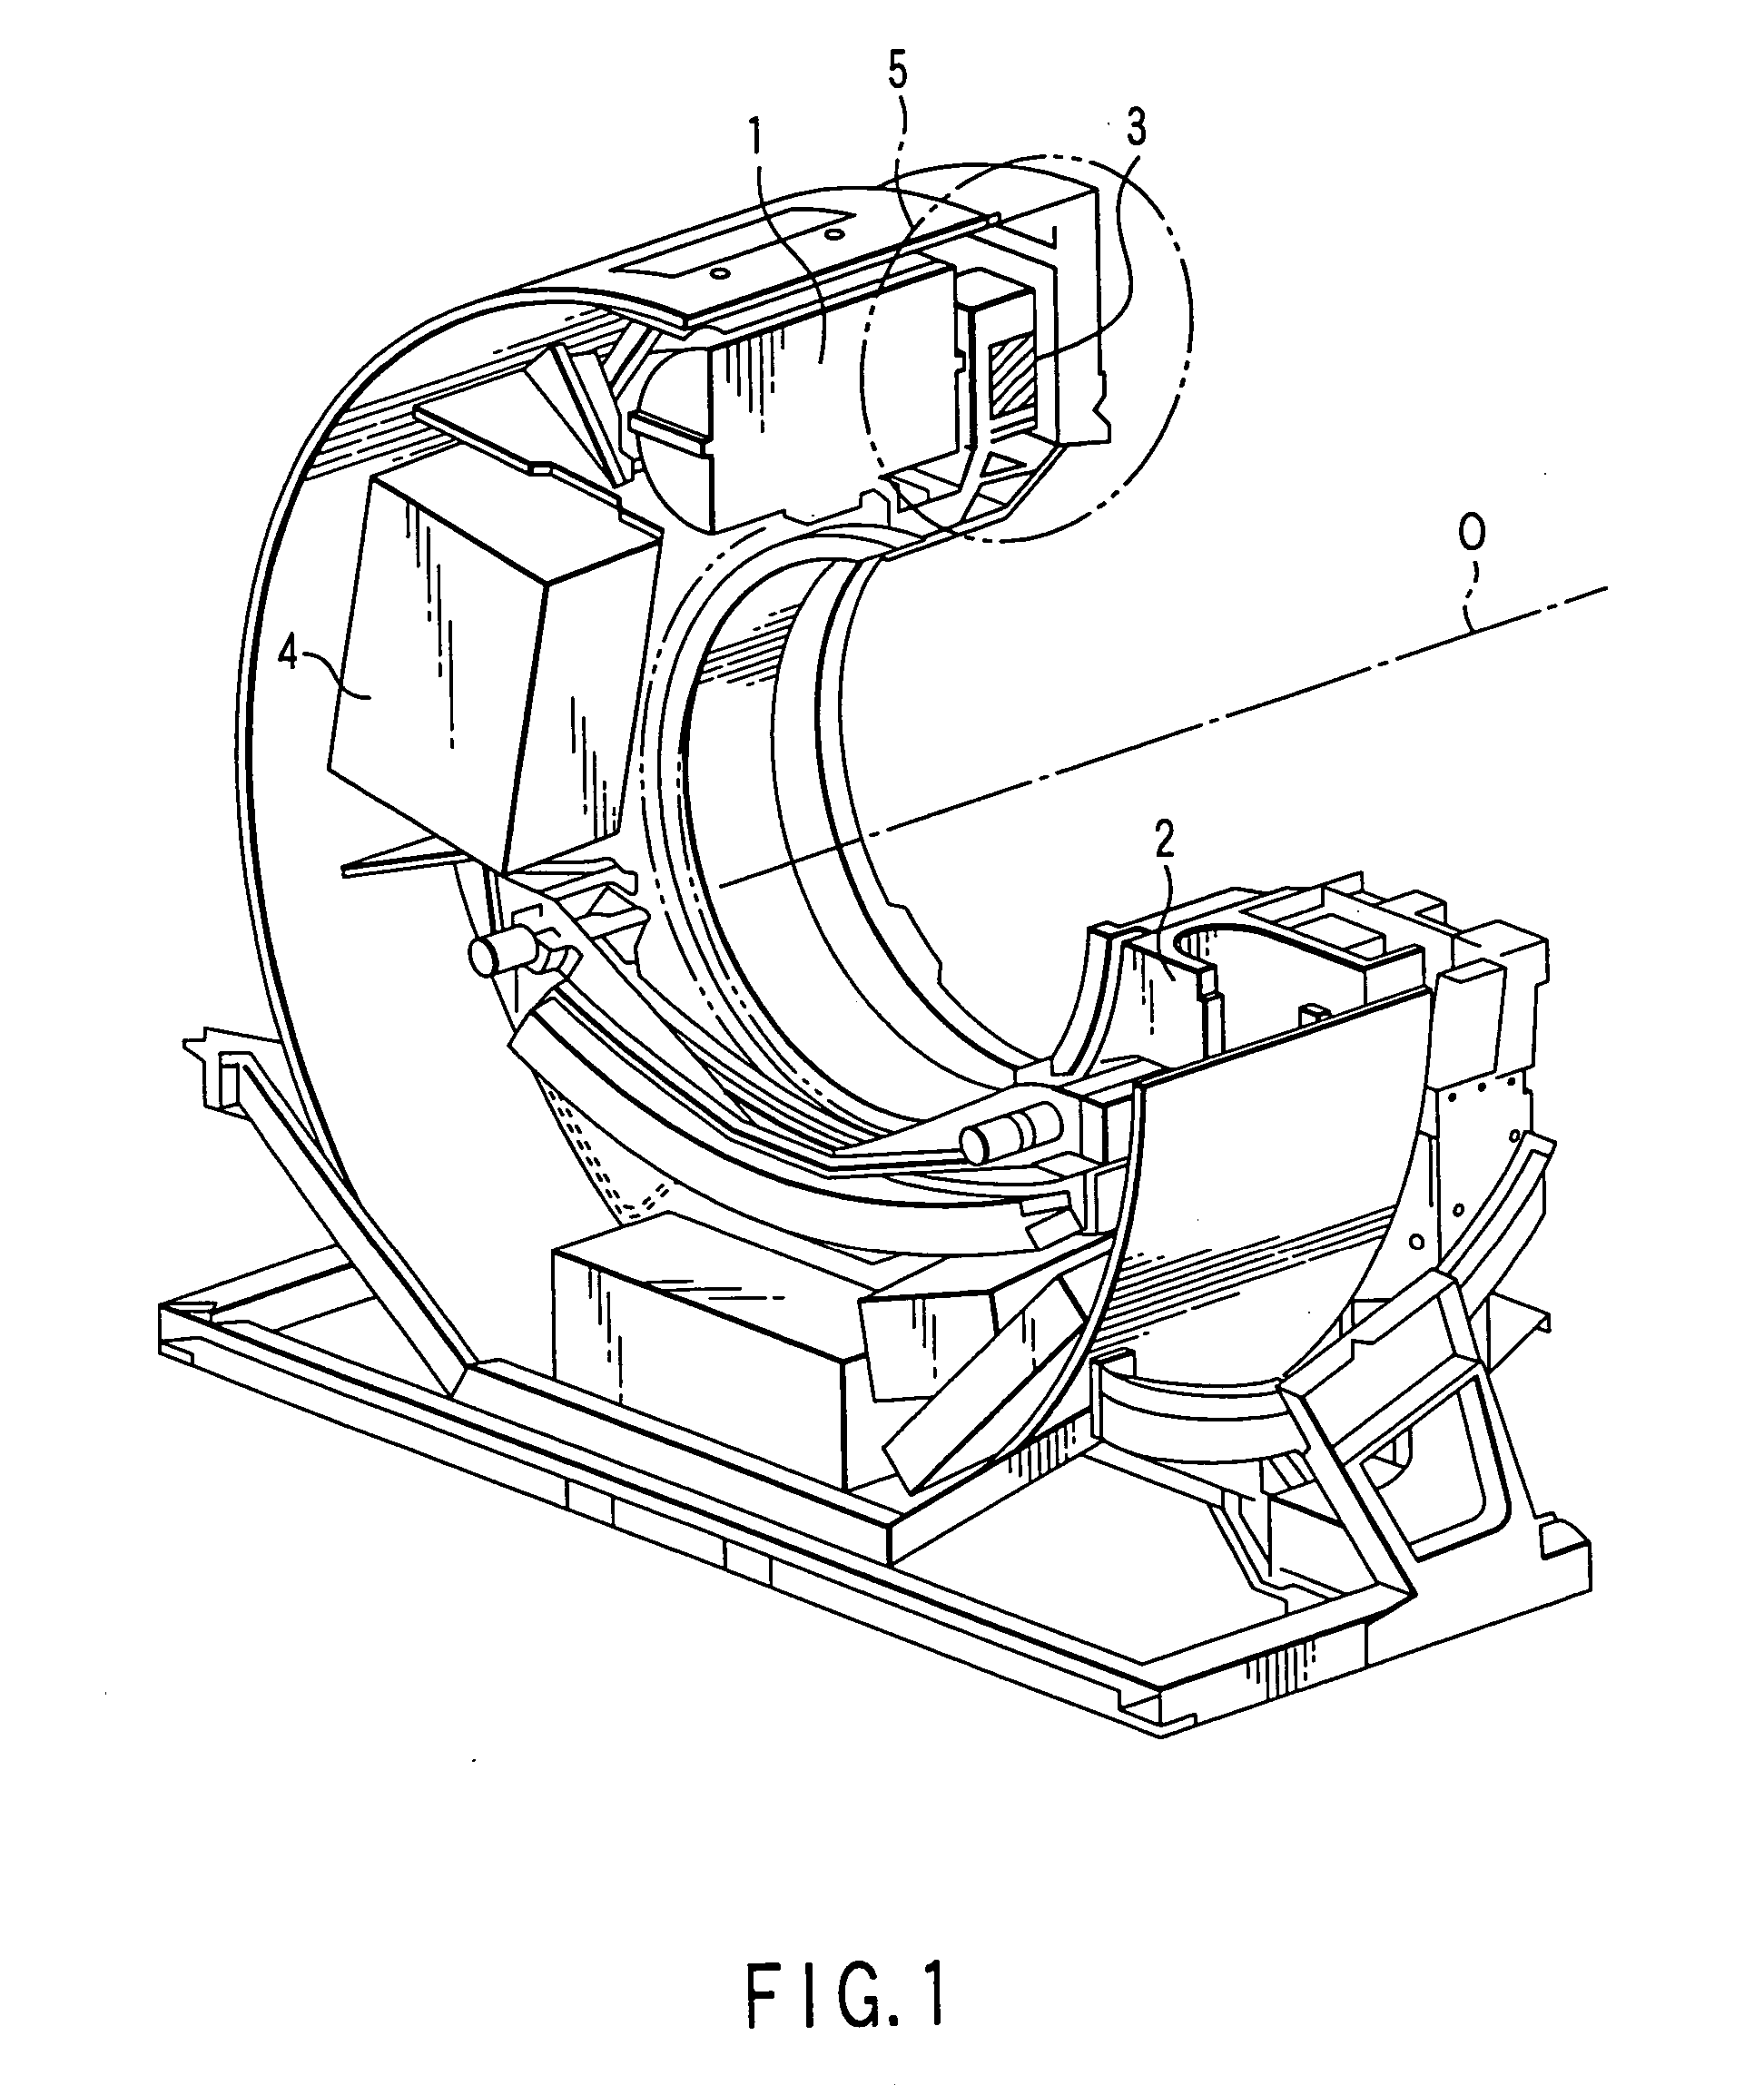 Optical properties restoration apparatus, the restoration method, and an optical system used in the apparatus